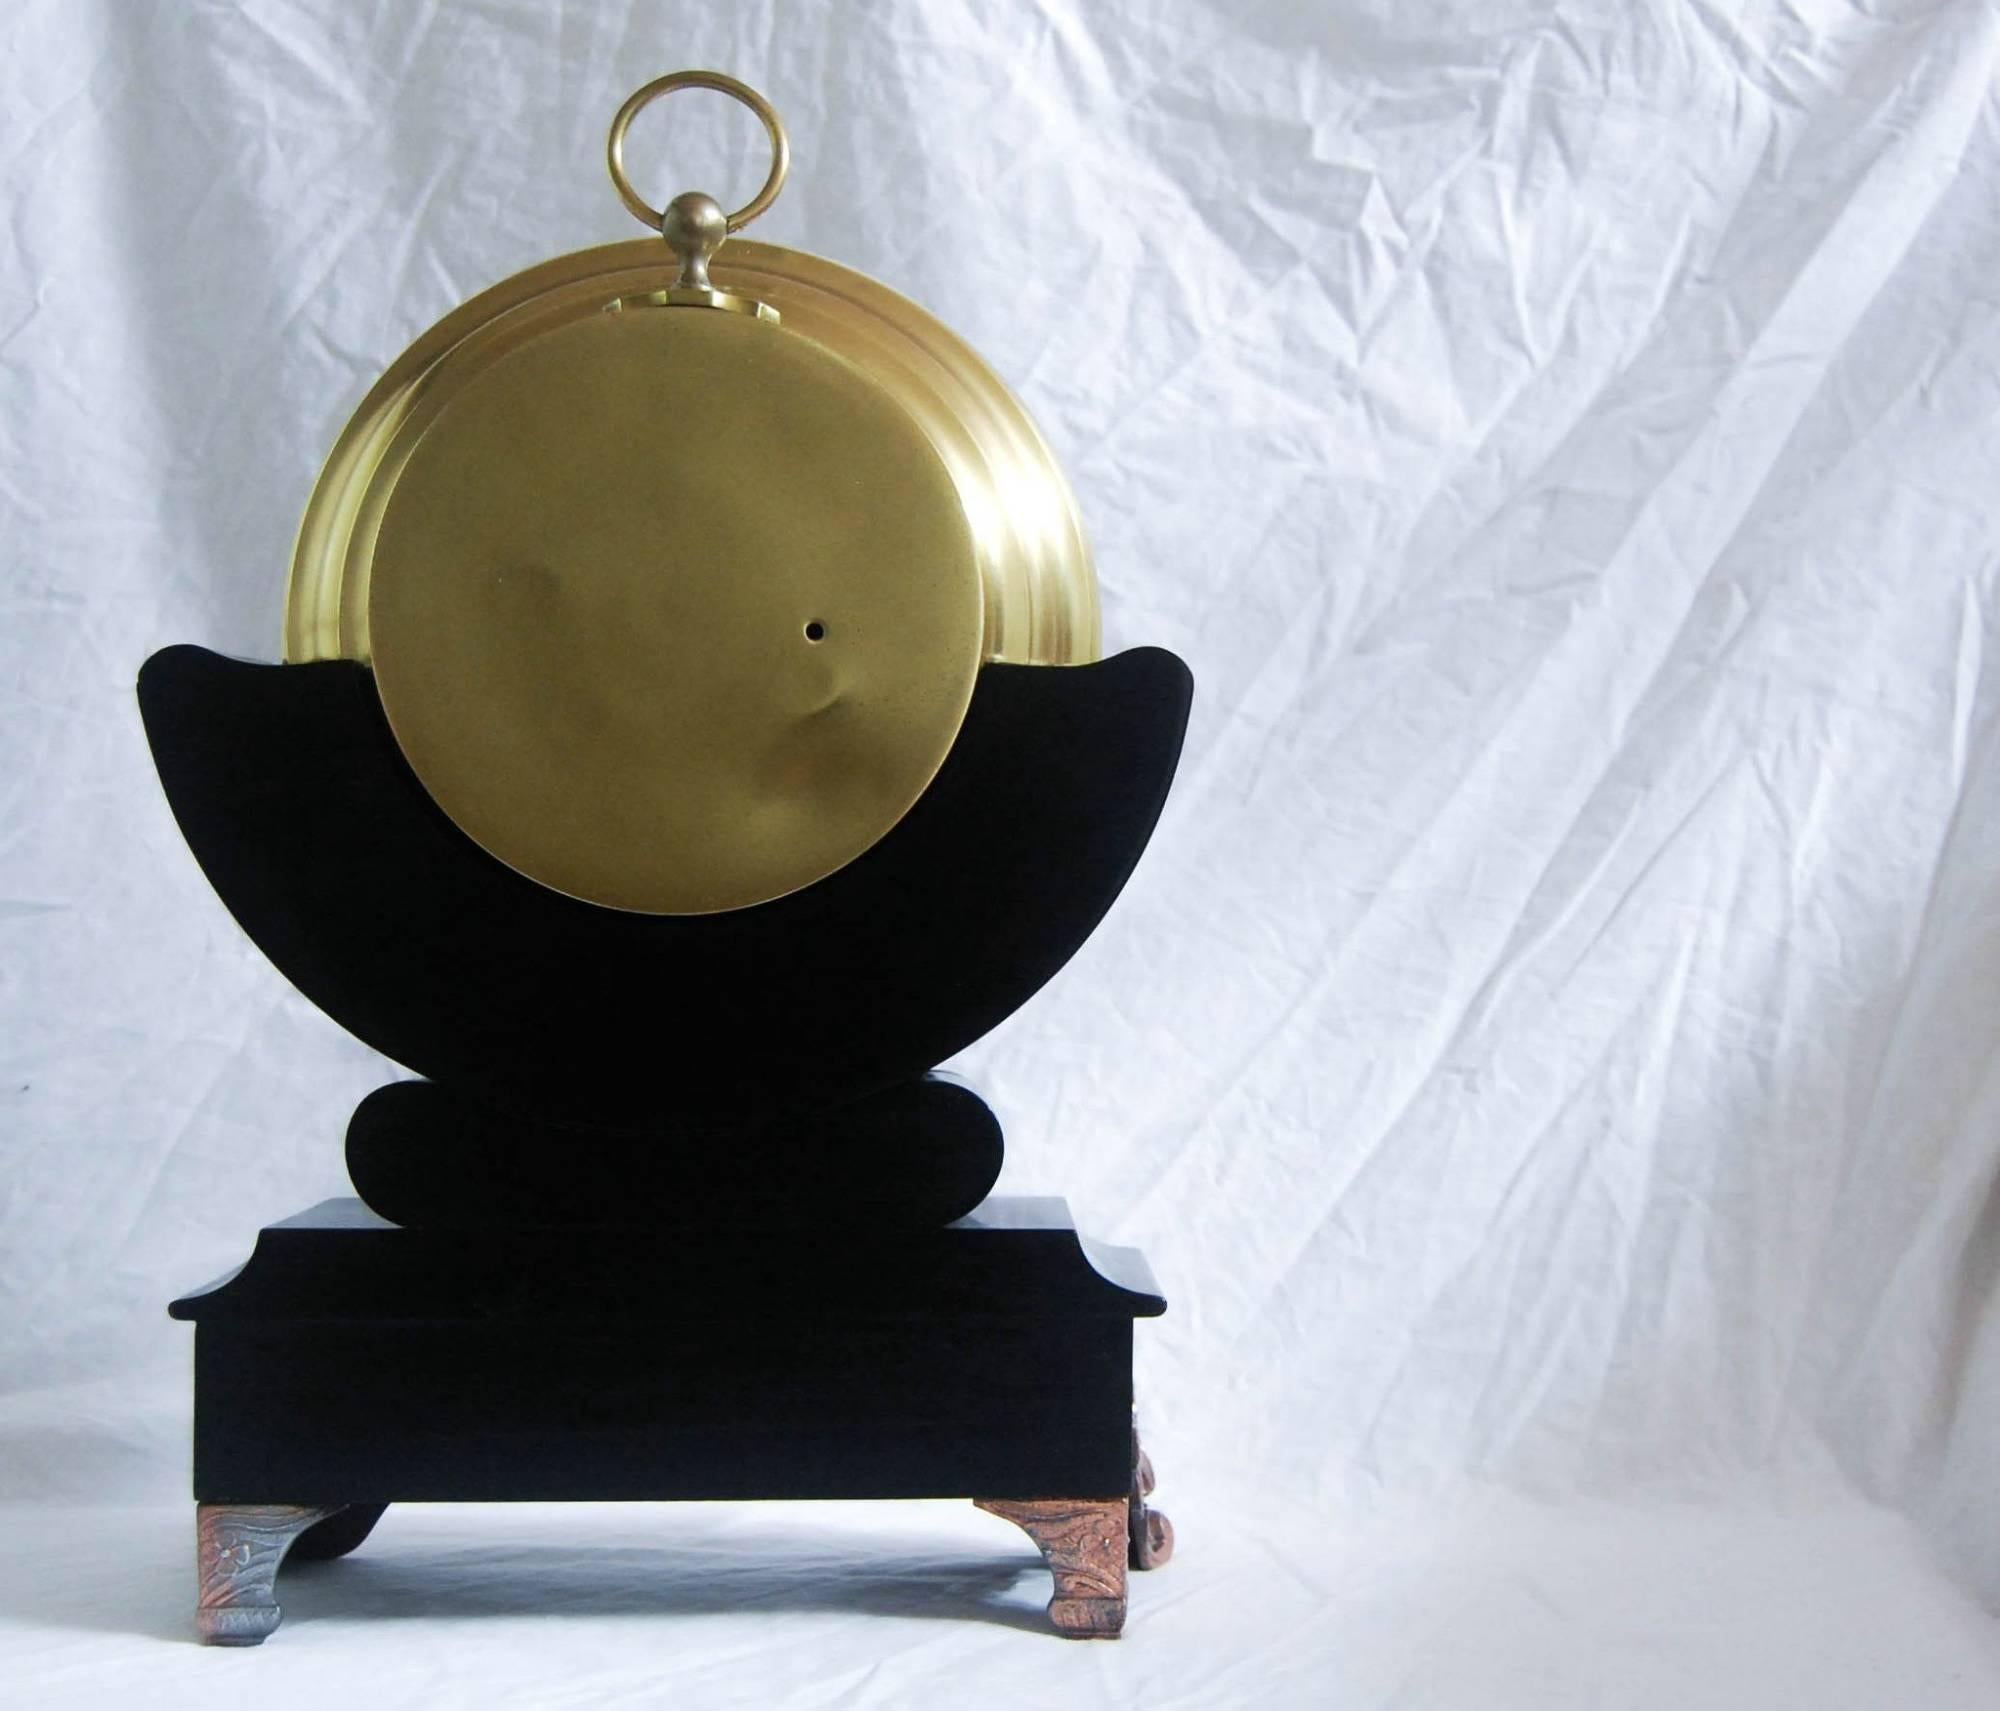 20th Century Huge Late Victorian Dial Brass Aneroid Barometer on Ebonized Stand by WJ Hass